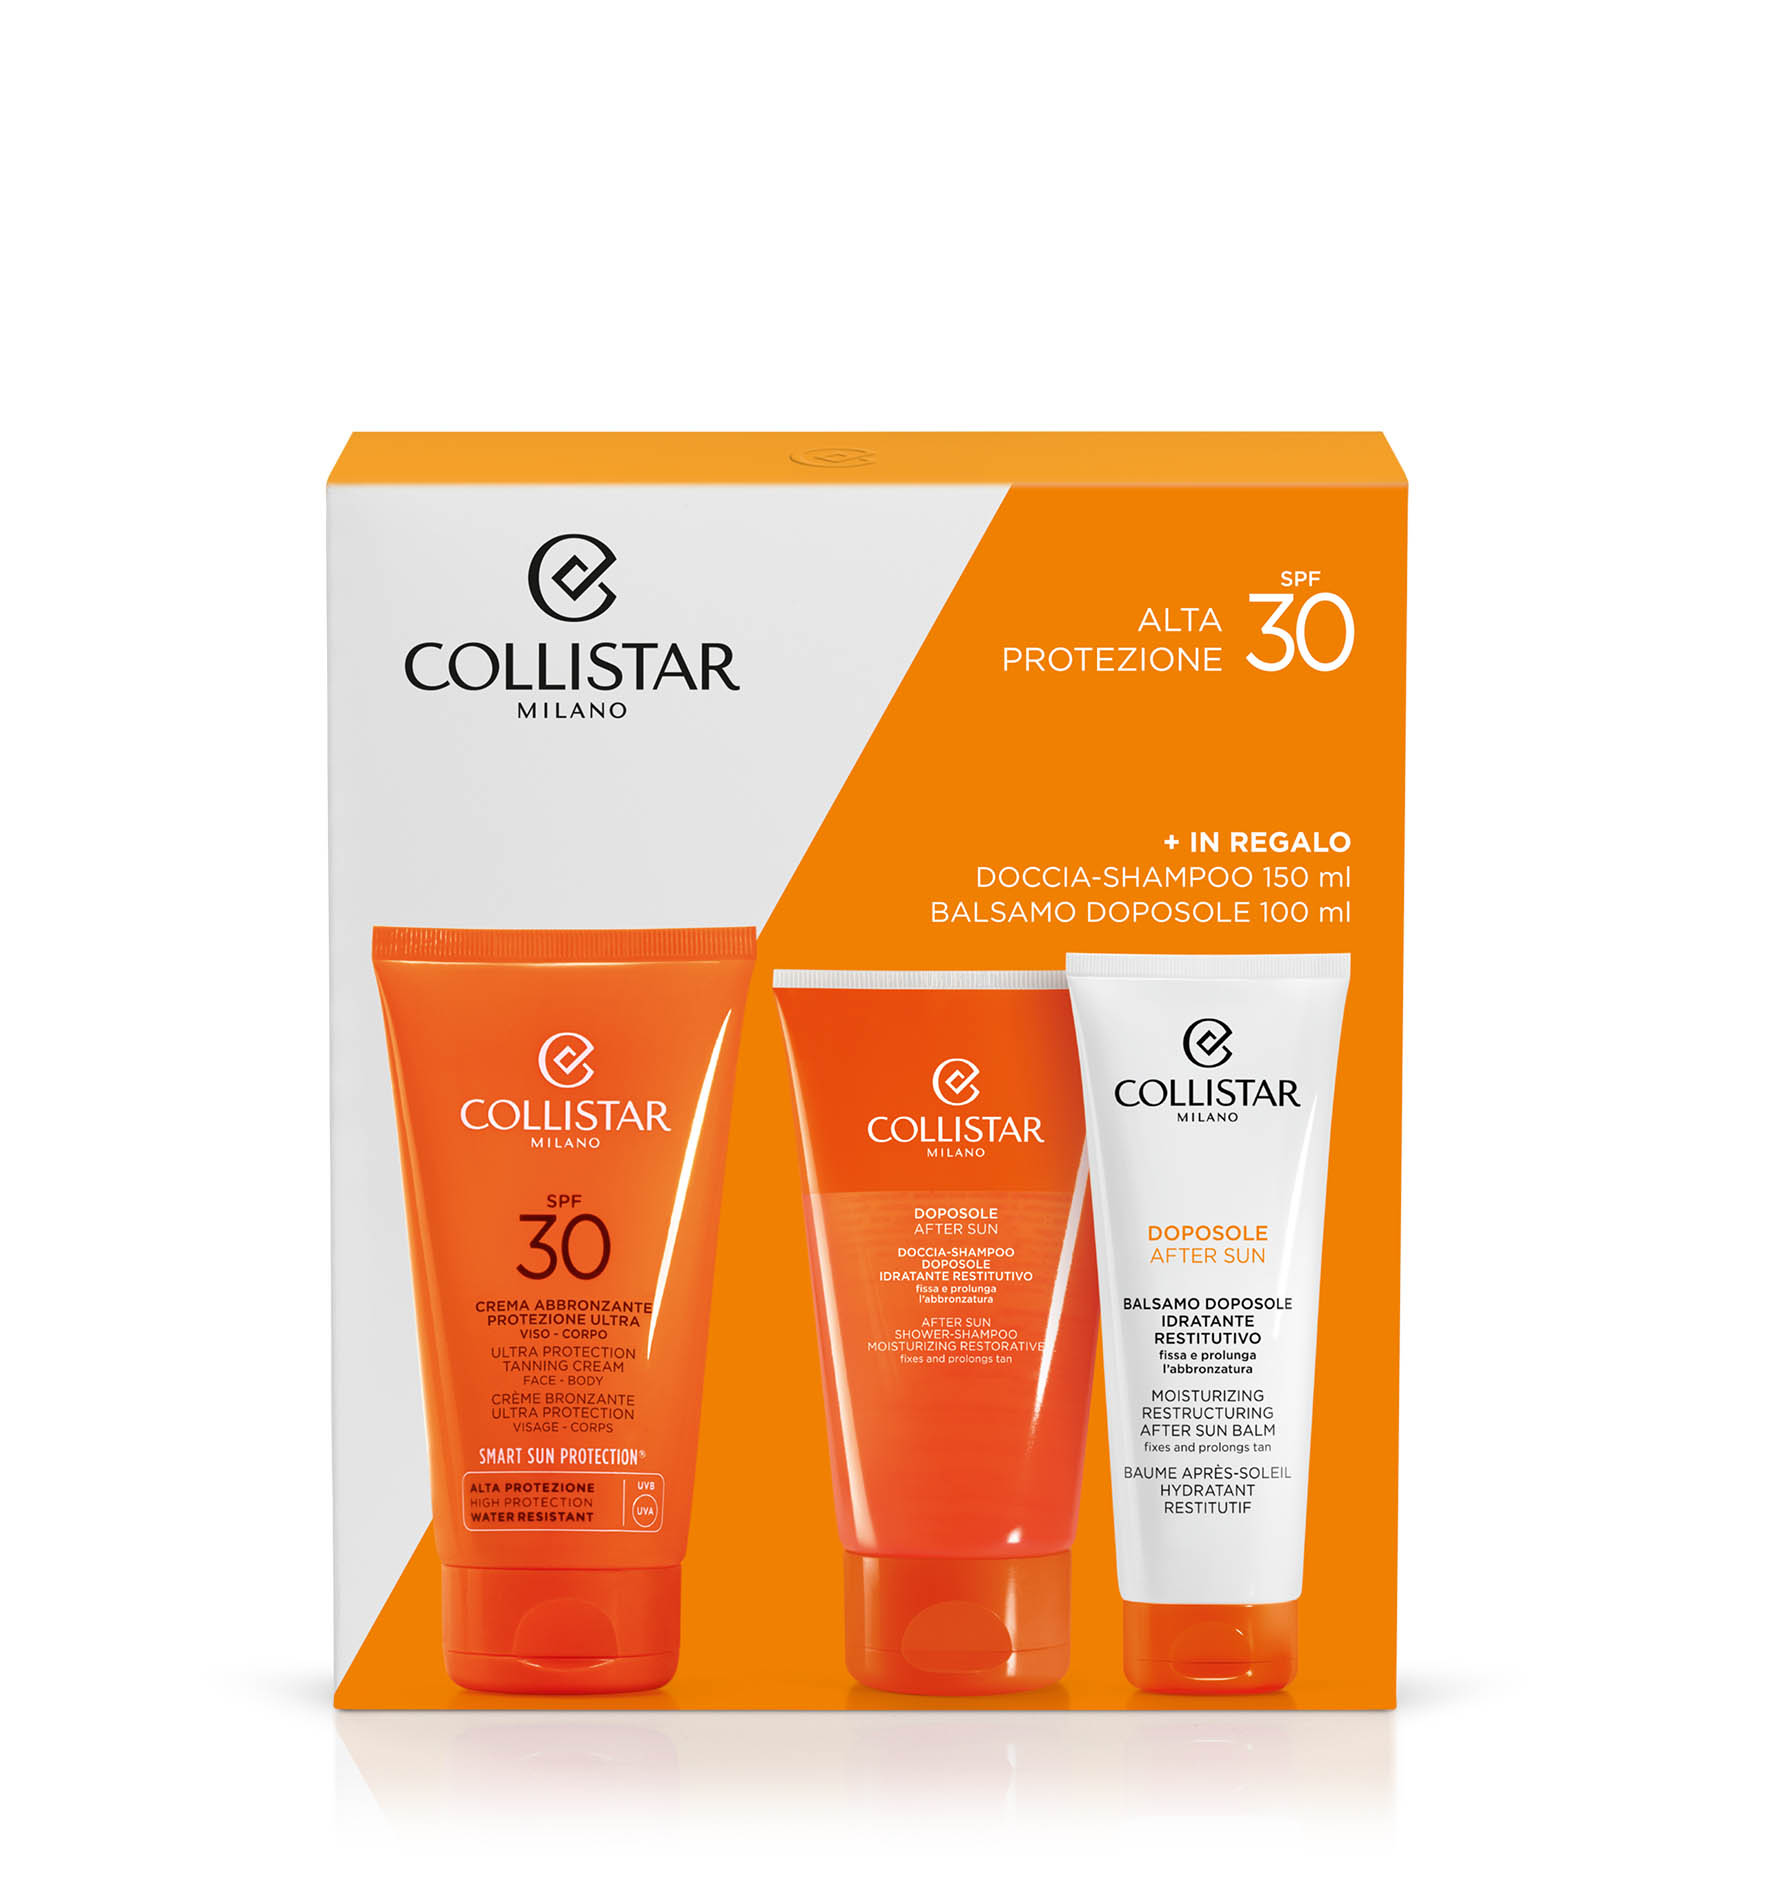 SET ULTRA PROTECTION TANNING CREAM FACE-BODY SPF 30 - GIFT IDEAS | Collistar - Shop Online Ufficiale